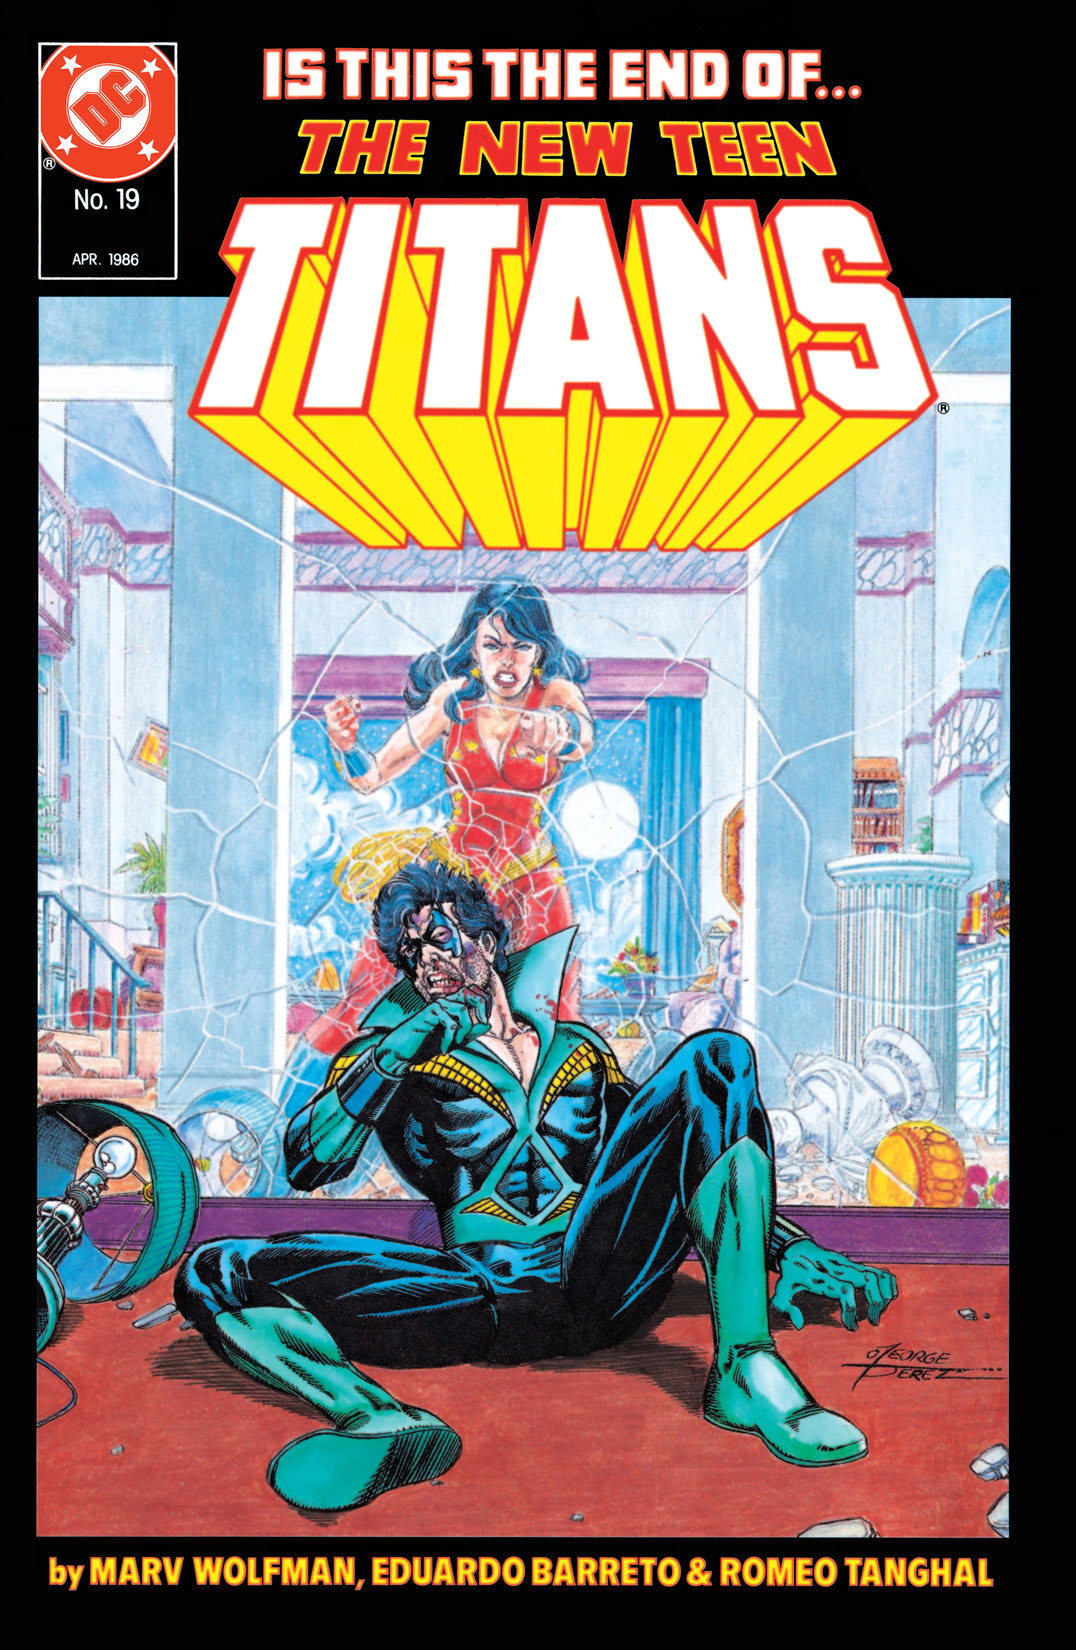 The New Teen Titans #19 preview images